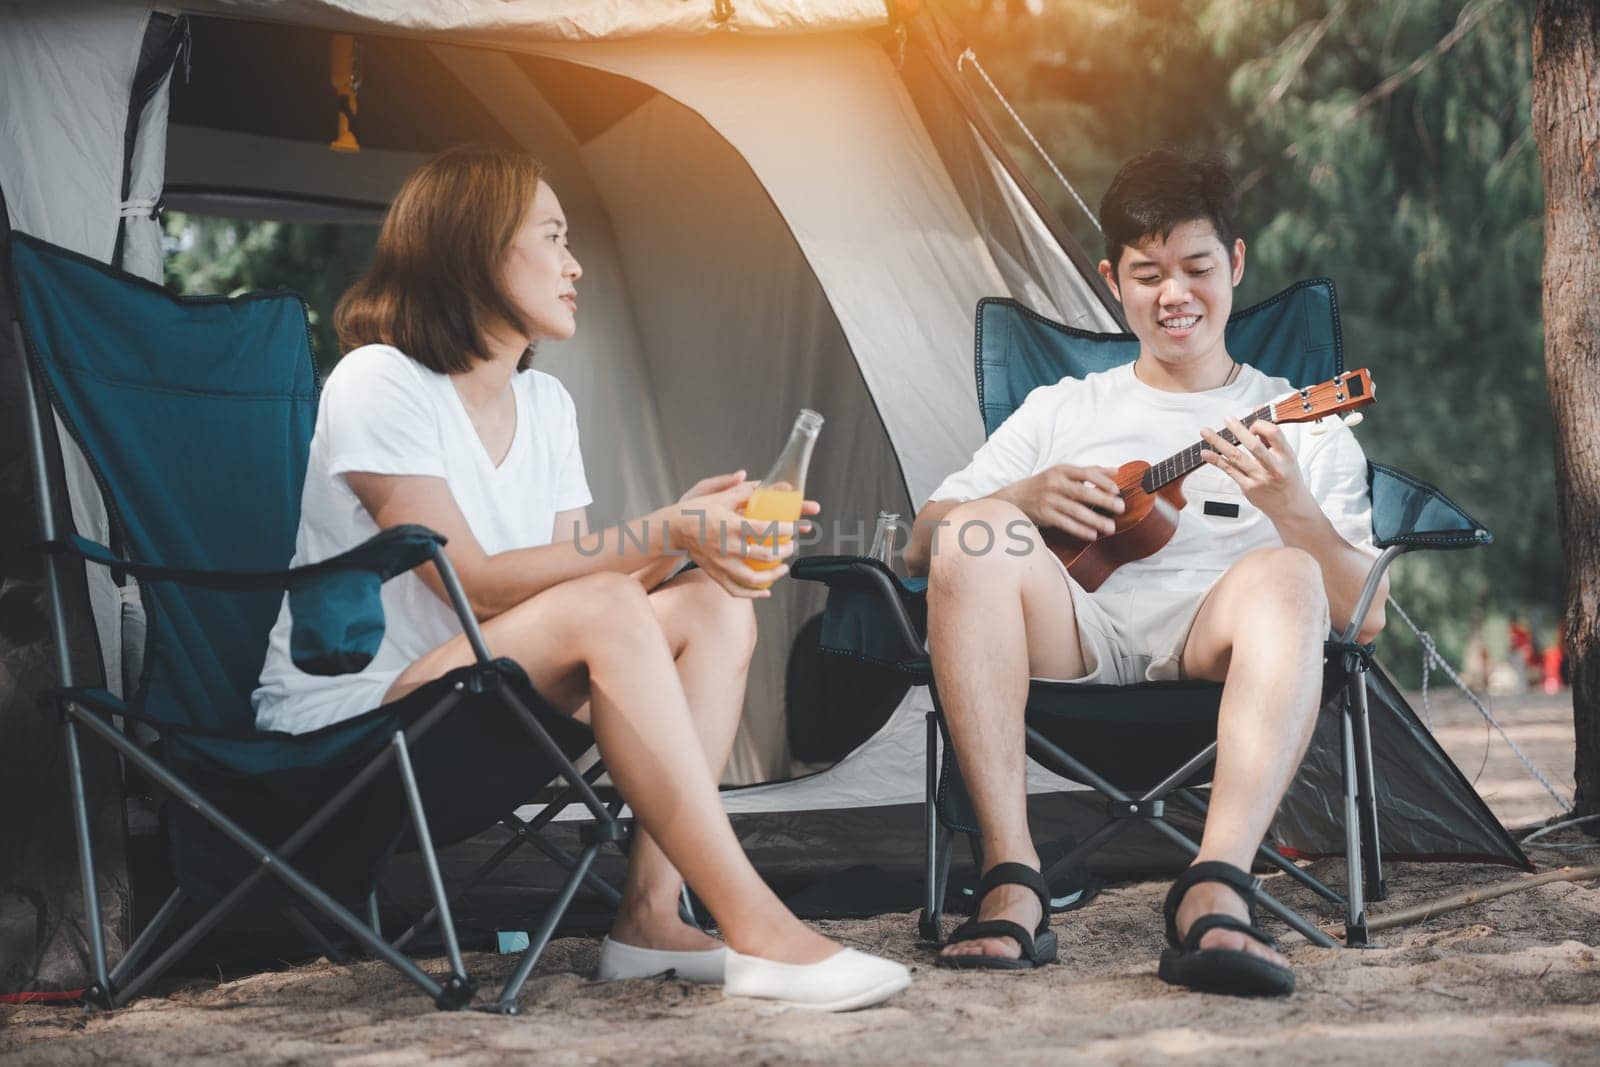 Love-filled moments at the campsite, An Asian couple playing the ukulele and singing, surrounded by the warmth of their tent. Their smiles reveal the joy of togetherness. Happiness is in the air. by Sorapop